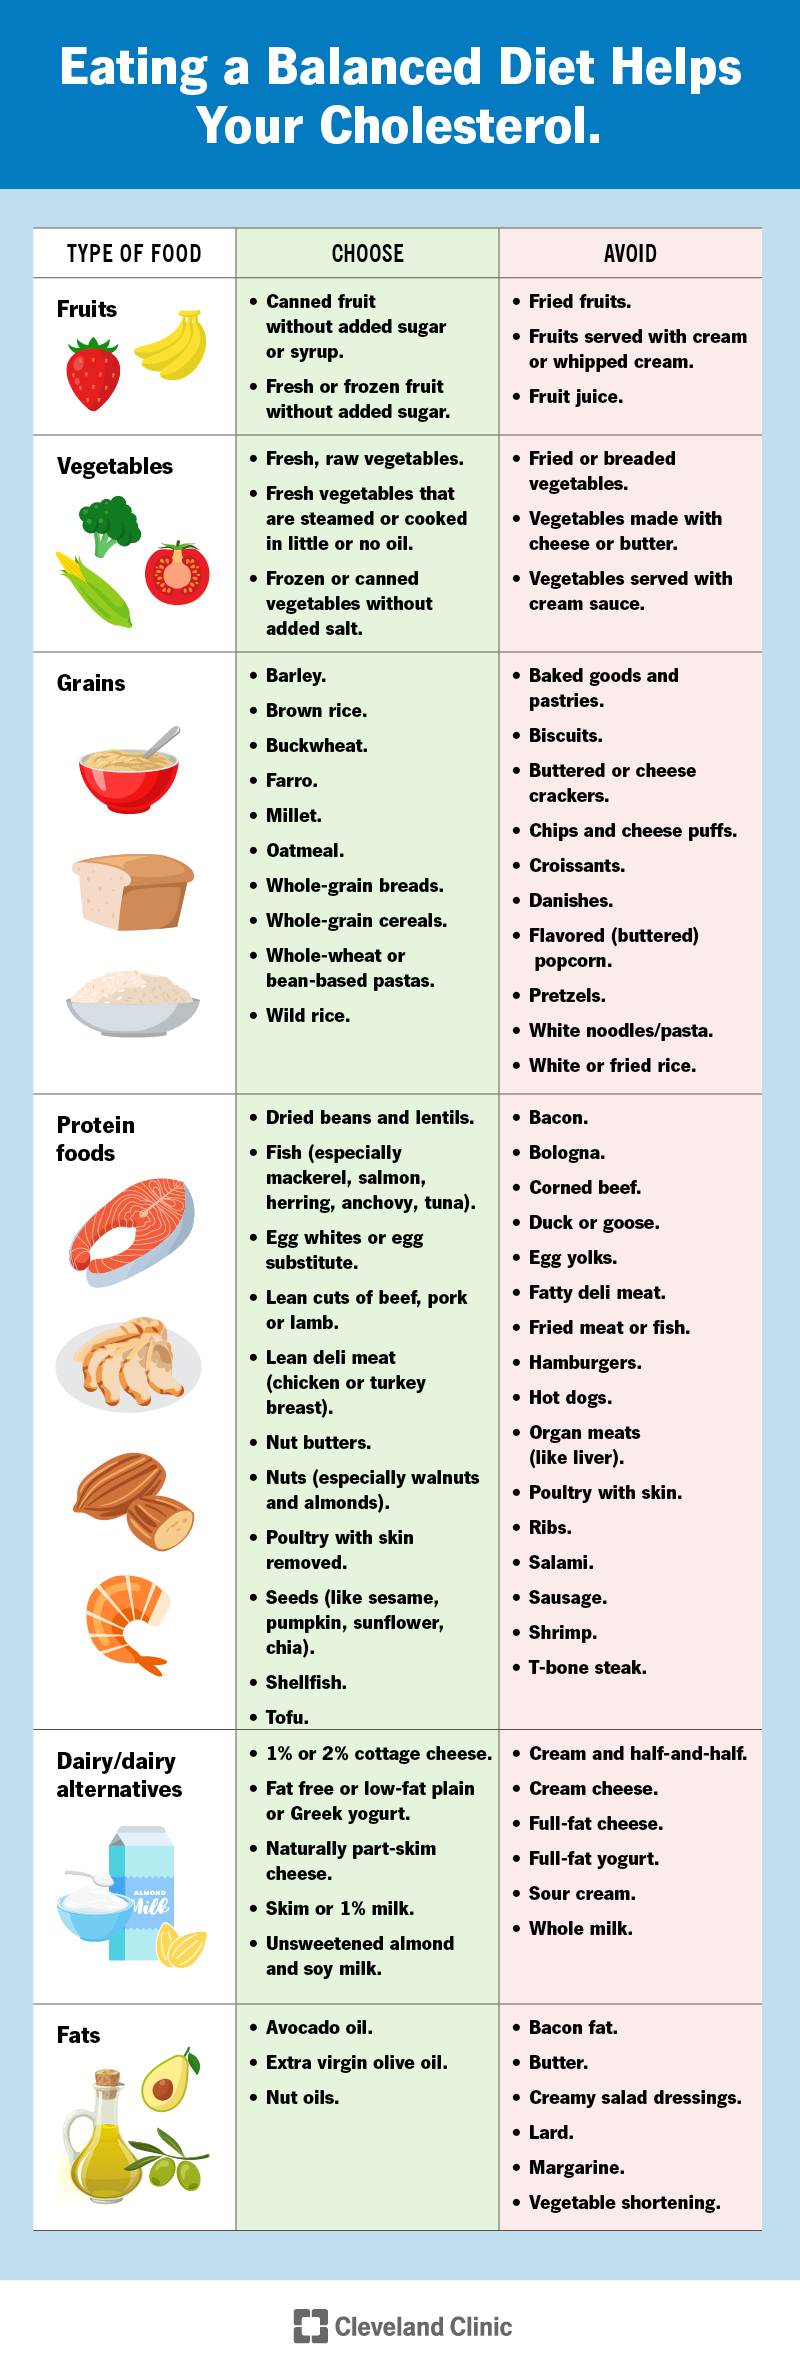 Infographic listing foods to choose and foods to avoid to have a healthy, balanced diet. Choose whole grains, fresh fruits and veggies, beans, fish, lowfat dairy and olive oil. Avoid fatty meats, anything fried, full-fat dairy, sweets and butter.